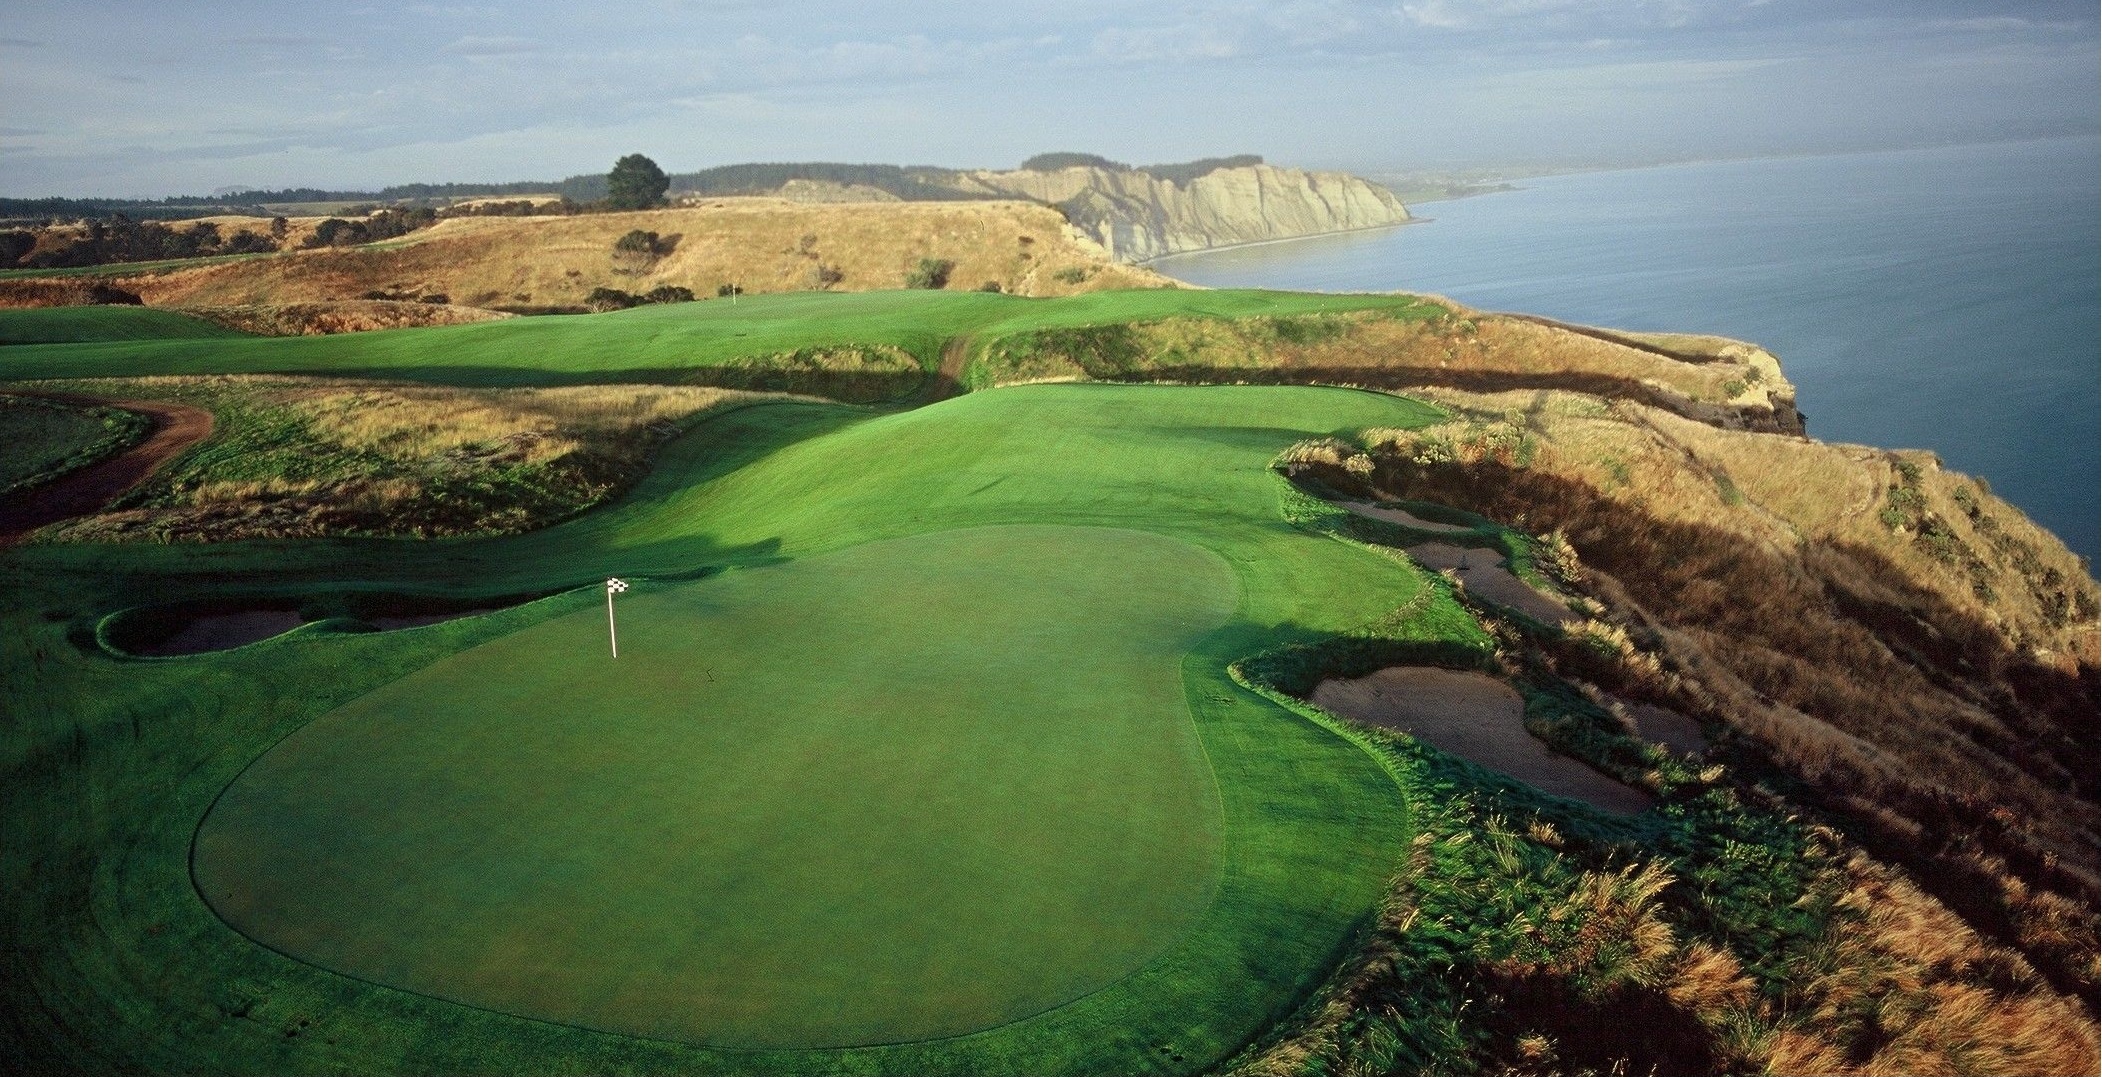 Golf Course at Cape Kidnappers, New Zealand ©Farm at Cape Kidnappers